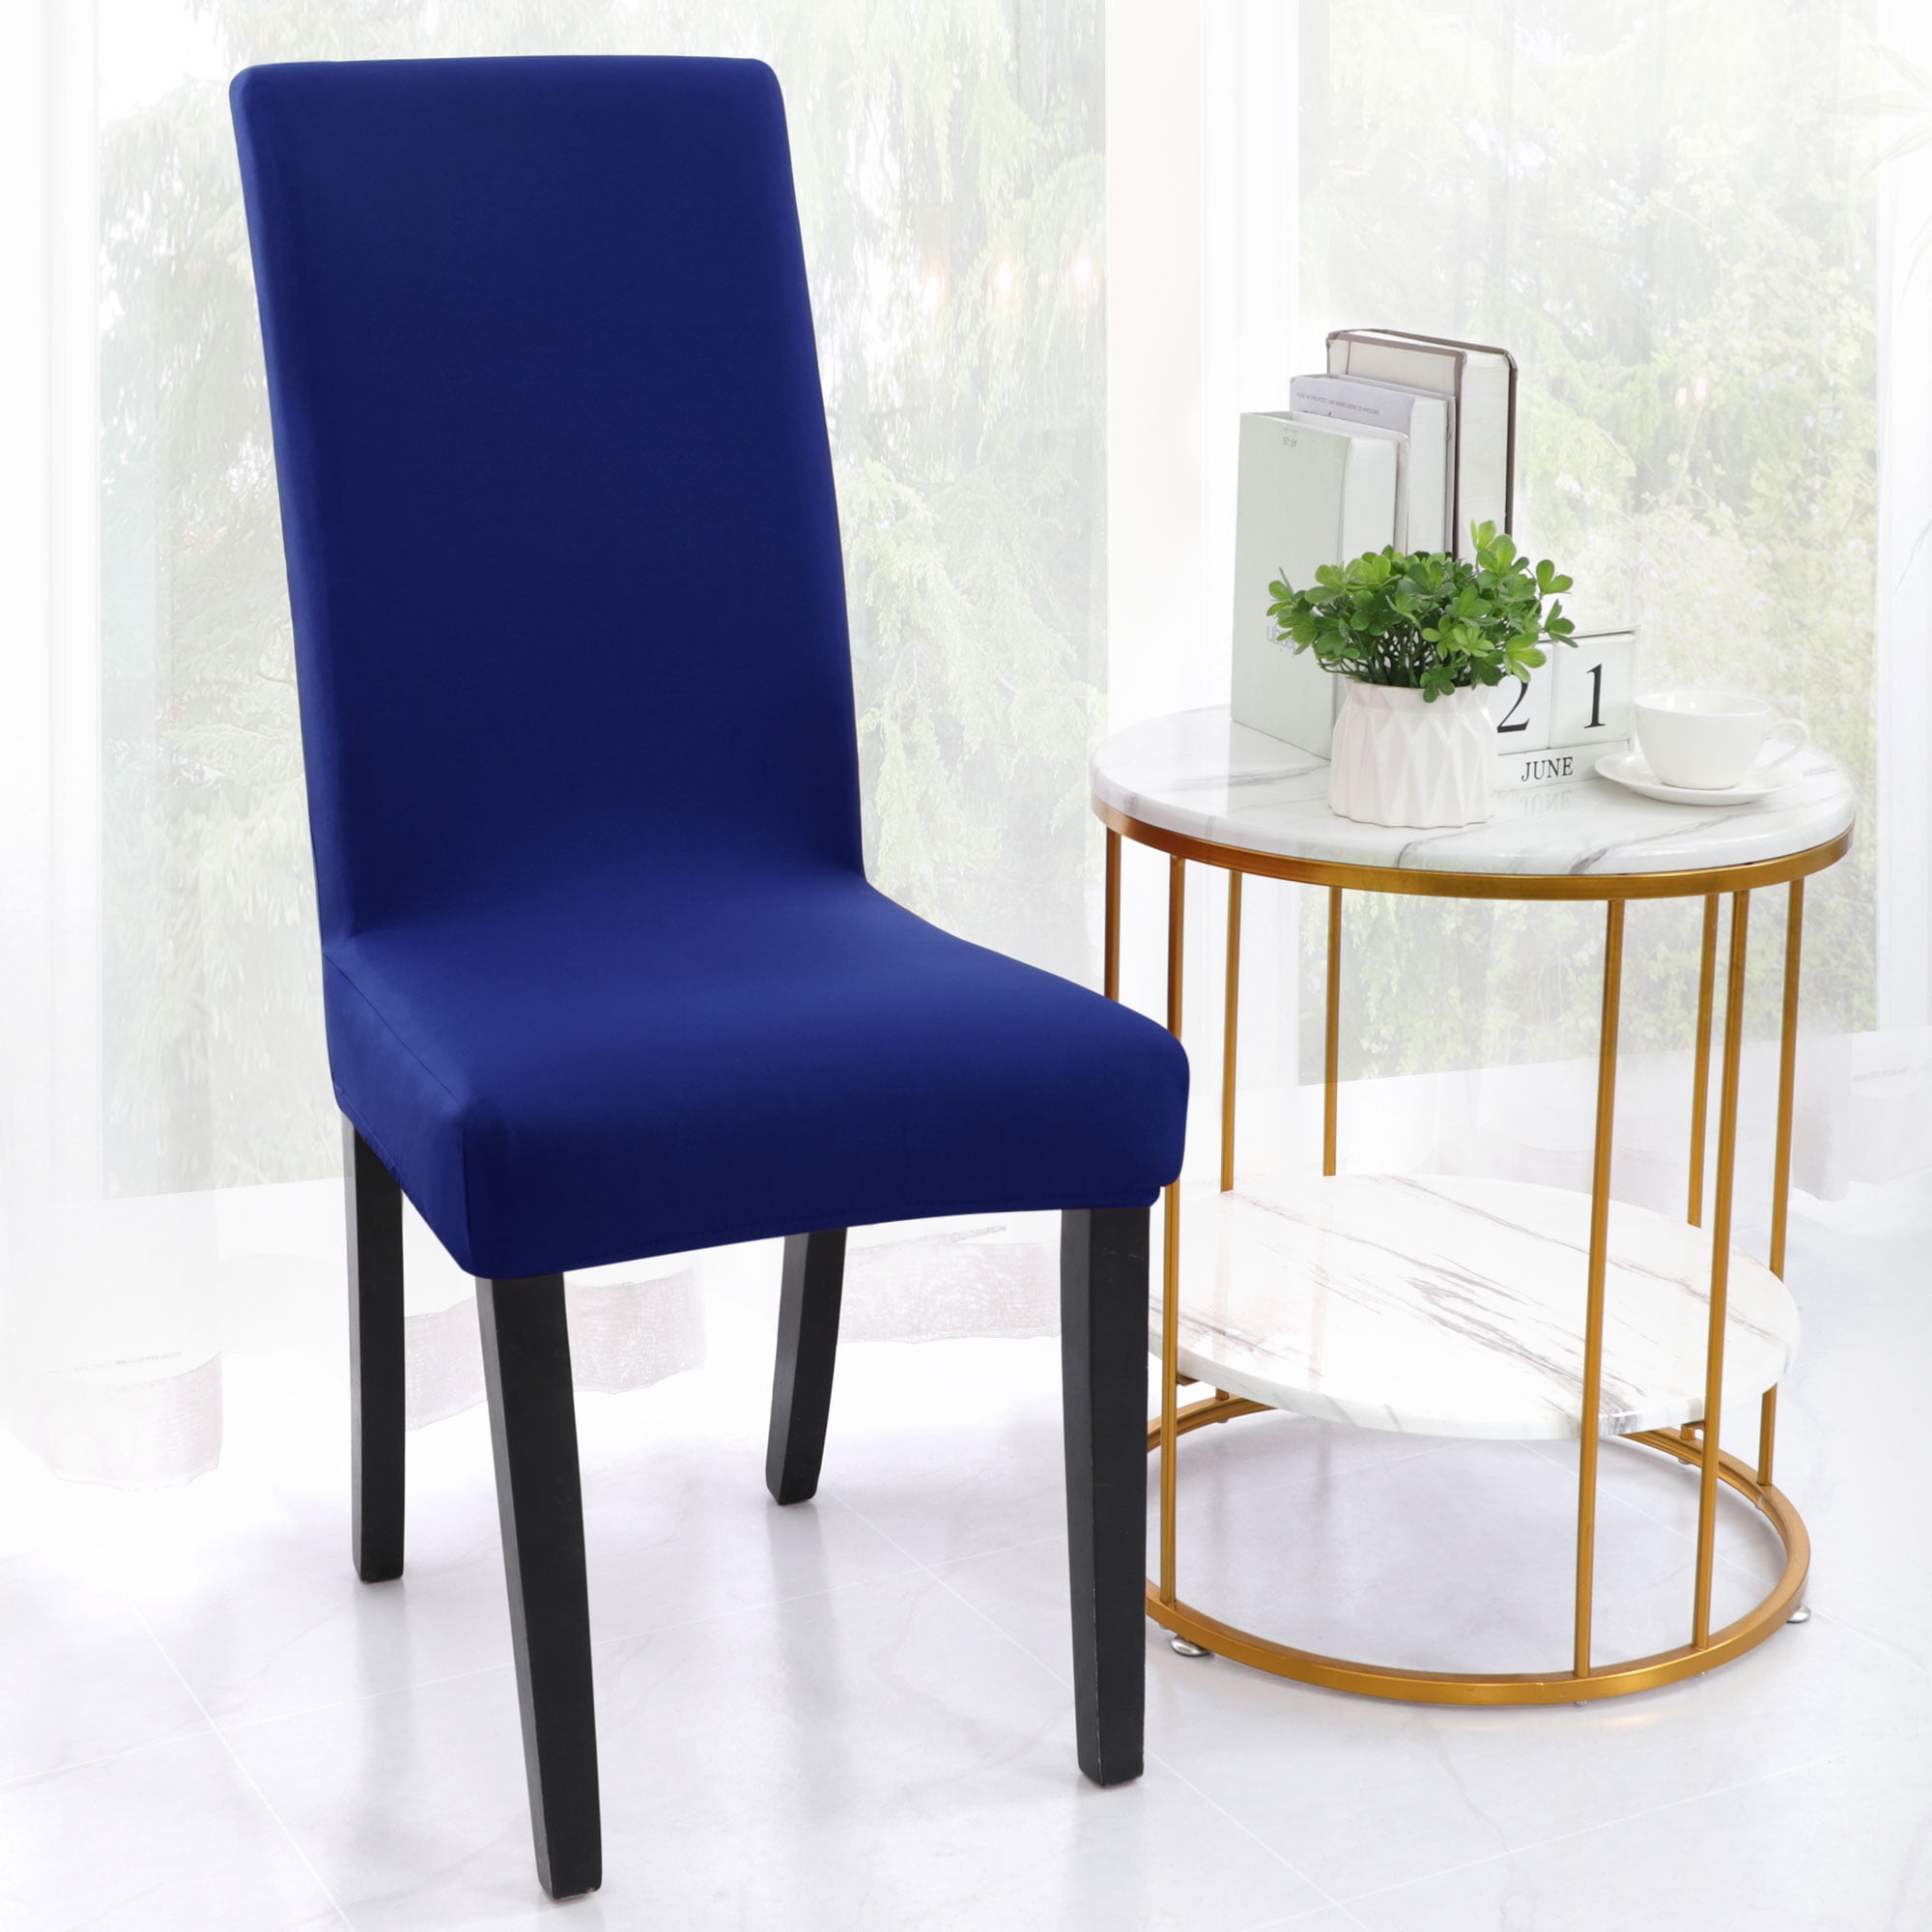 Details about   1/4/6Pcs PU Leather Stretch Dining Room Chair Cover Wedding Banquet Seat Covers 